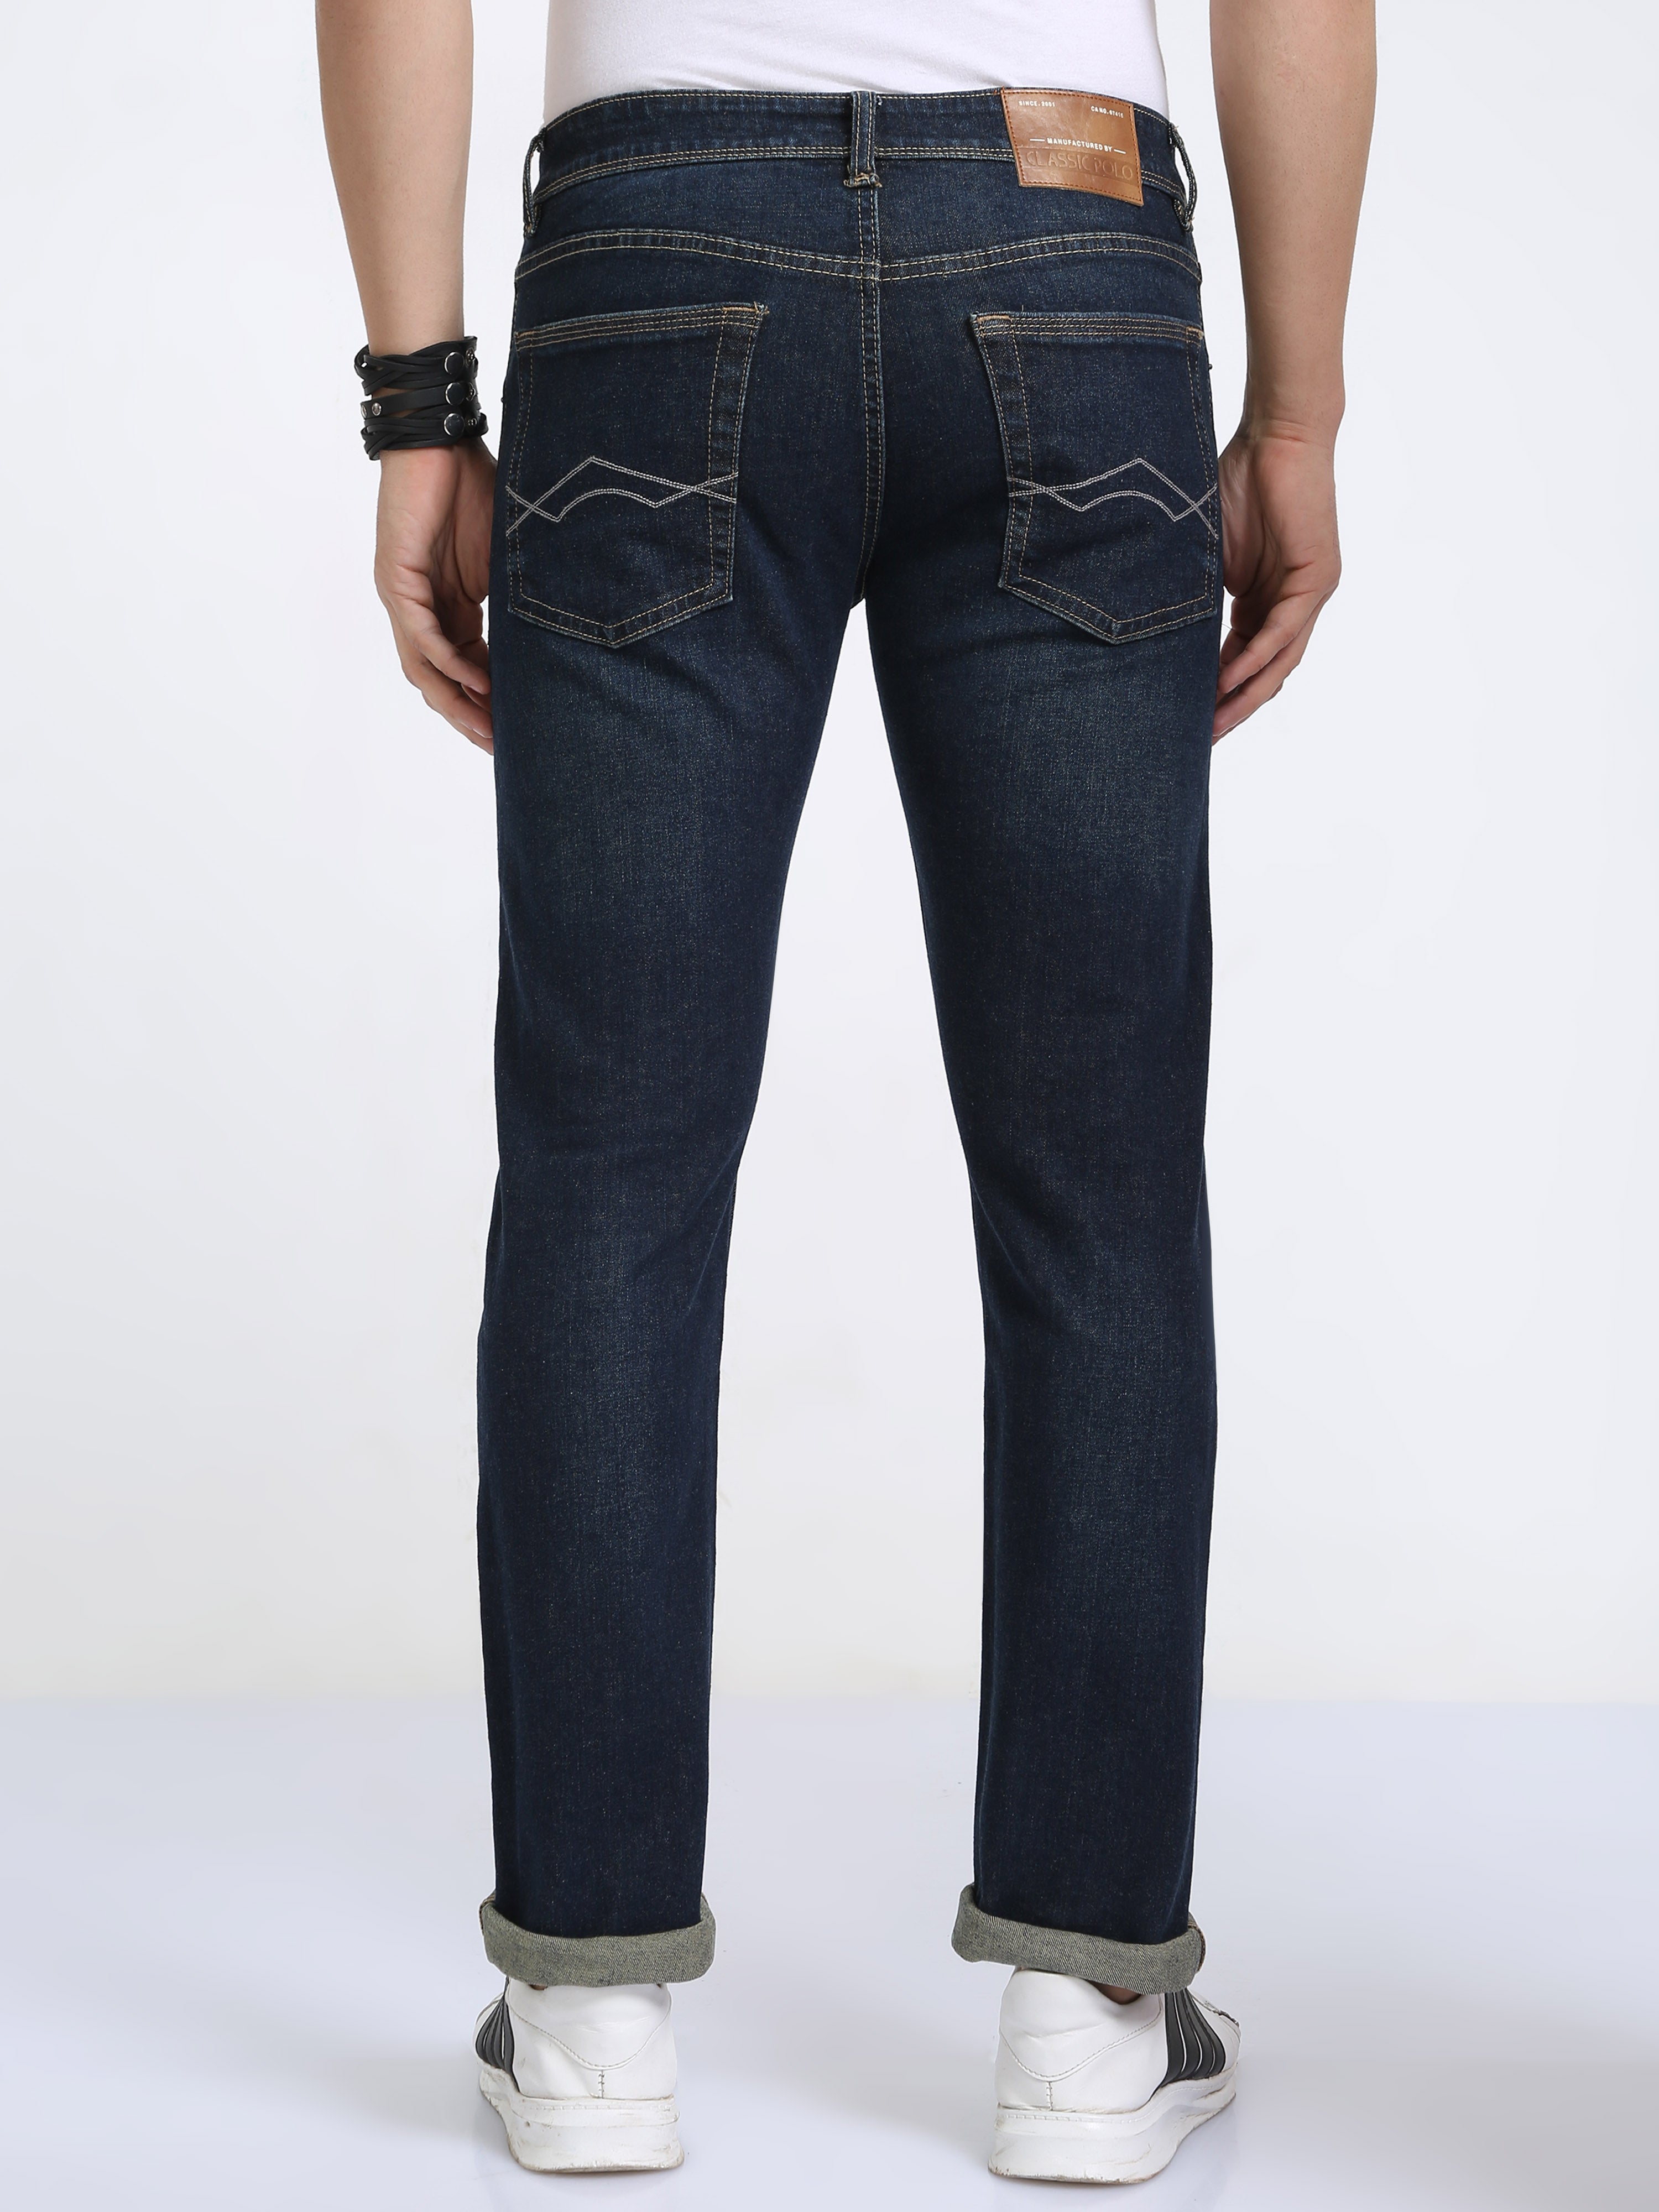 Classic Polo Men's Slim Fit Cotton Denim | CPDO2-29 NVY-SF-LY